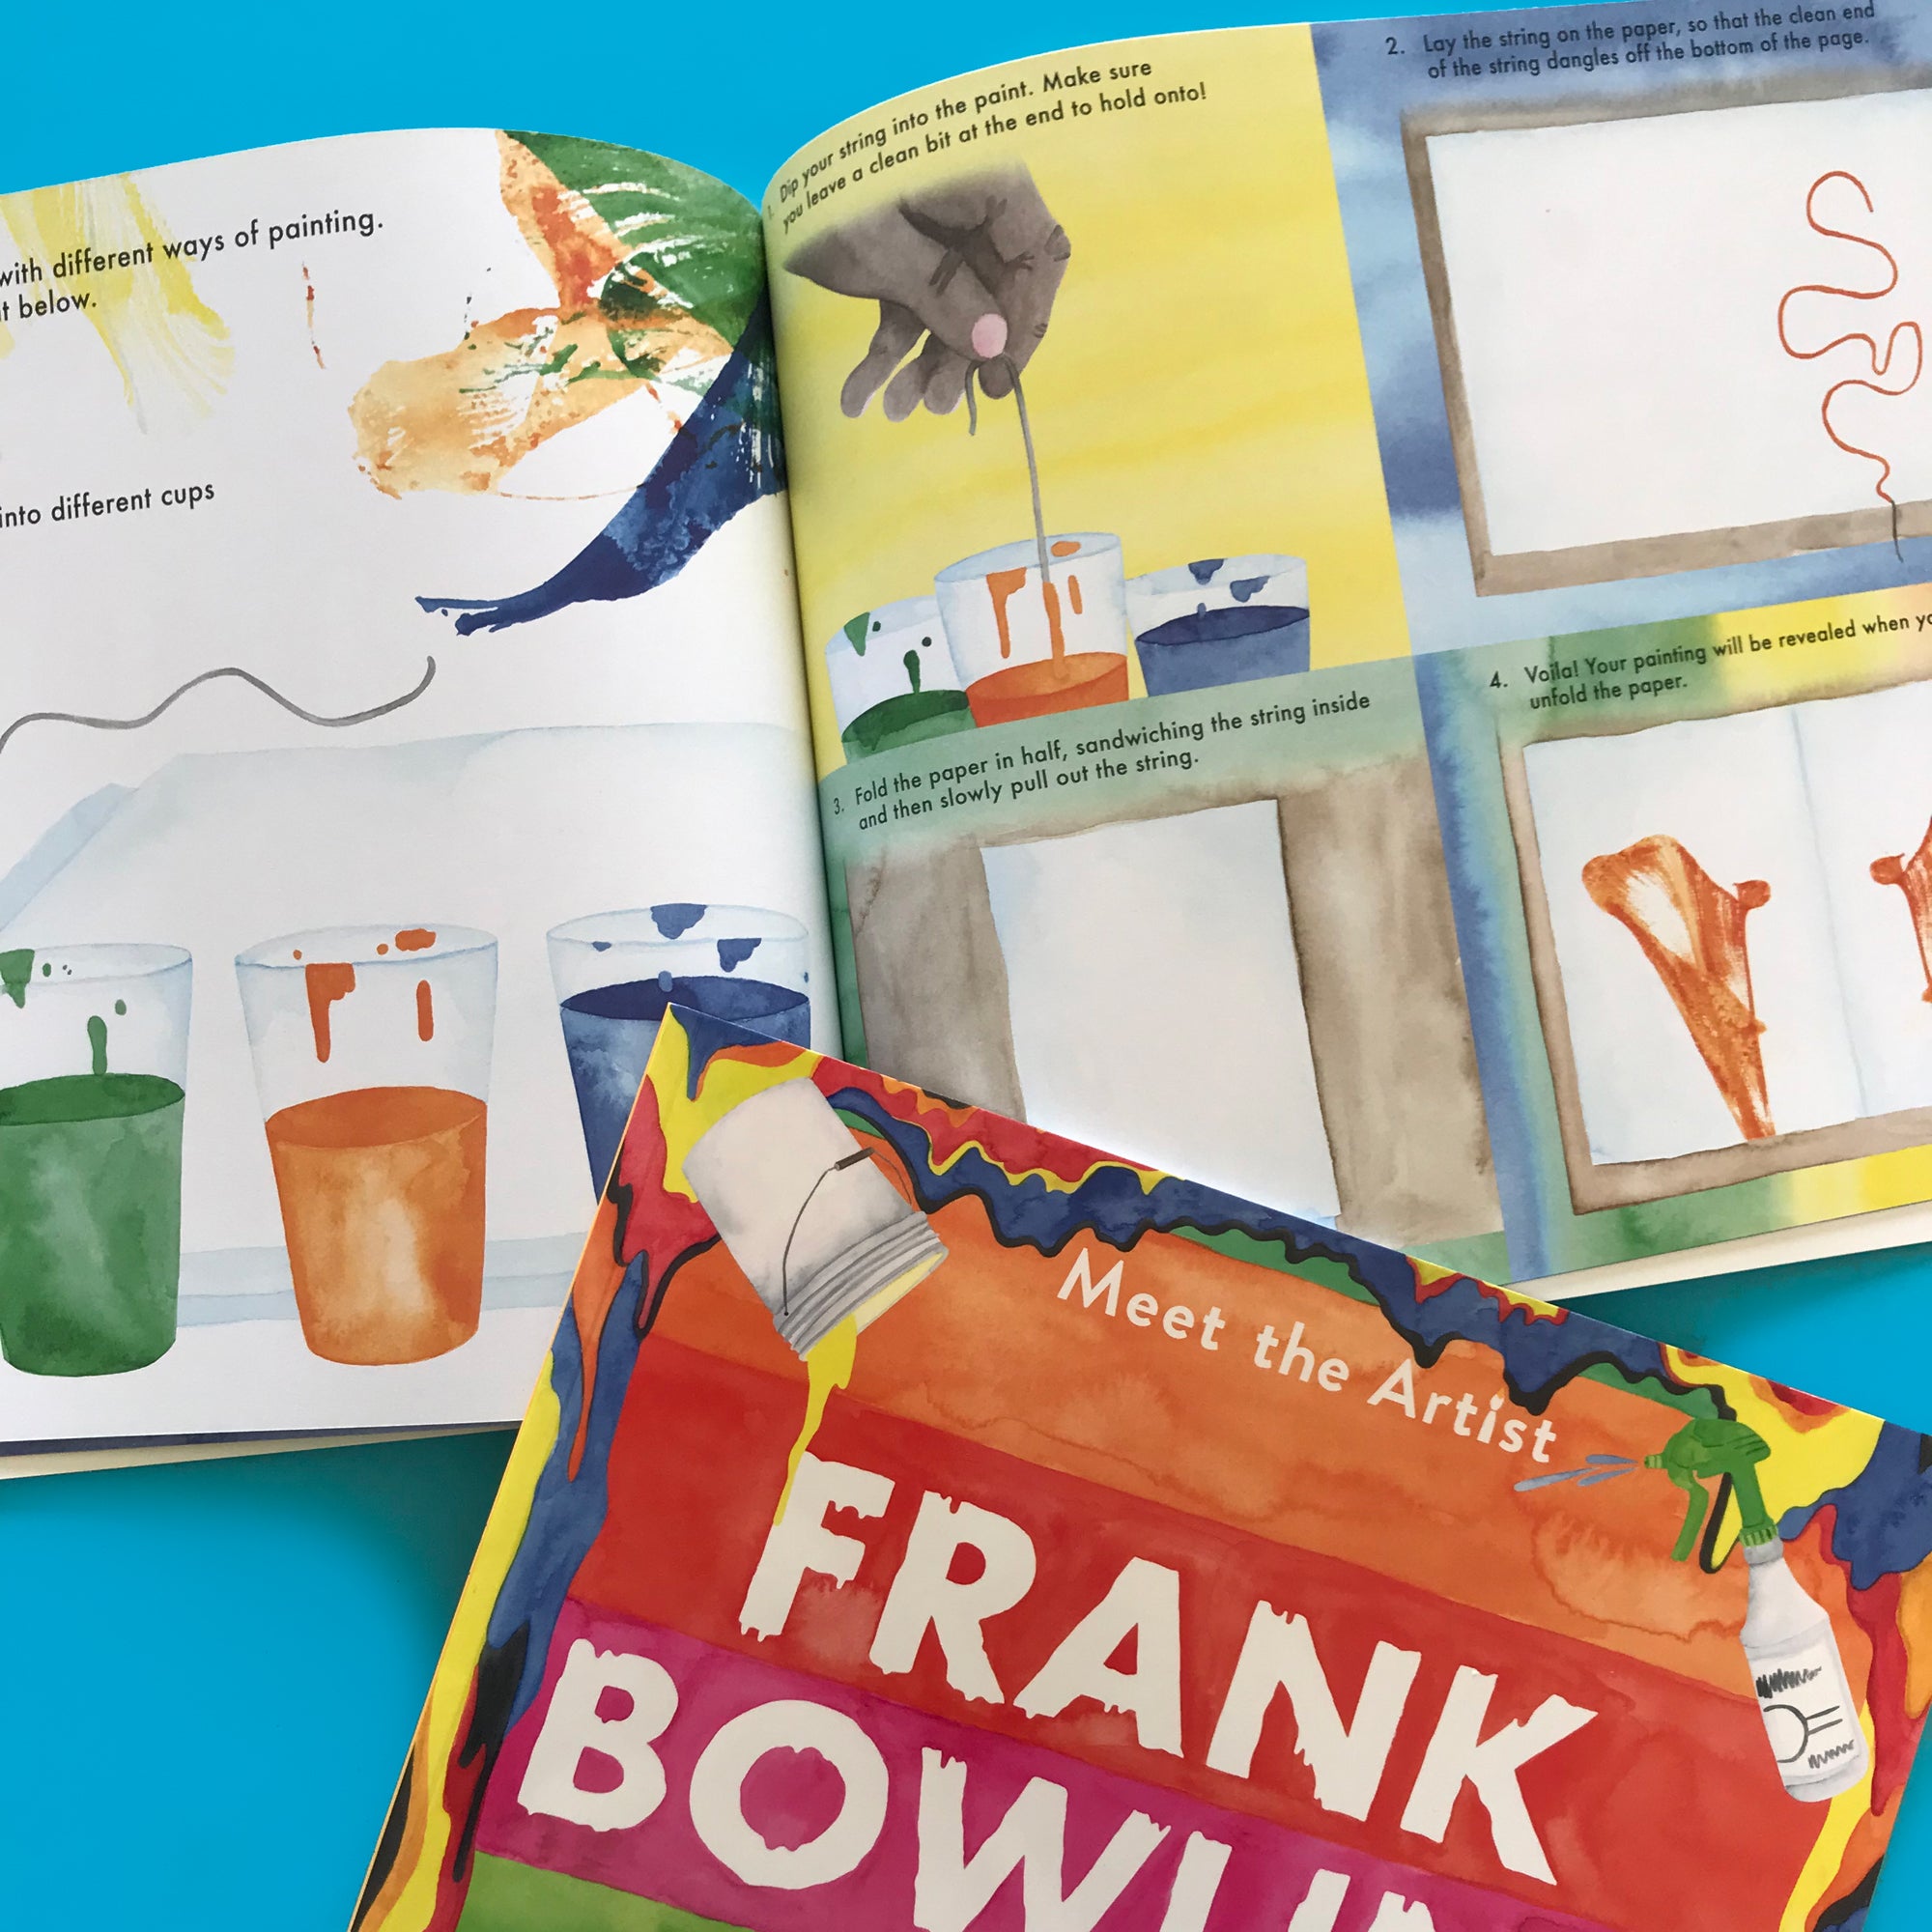 Mad　Bowling　Meet　Mini　book　activity　the　Frank　Artist:　Things